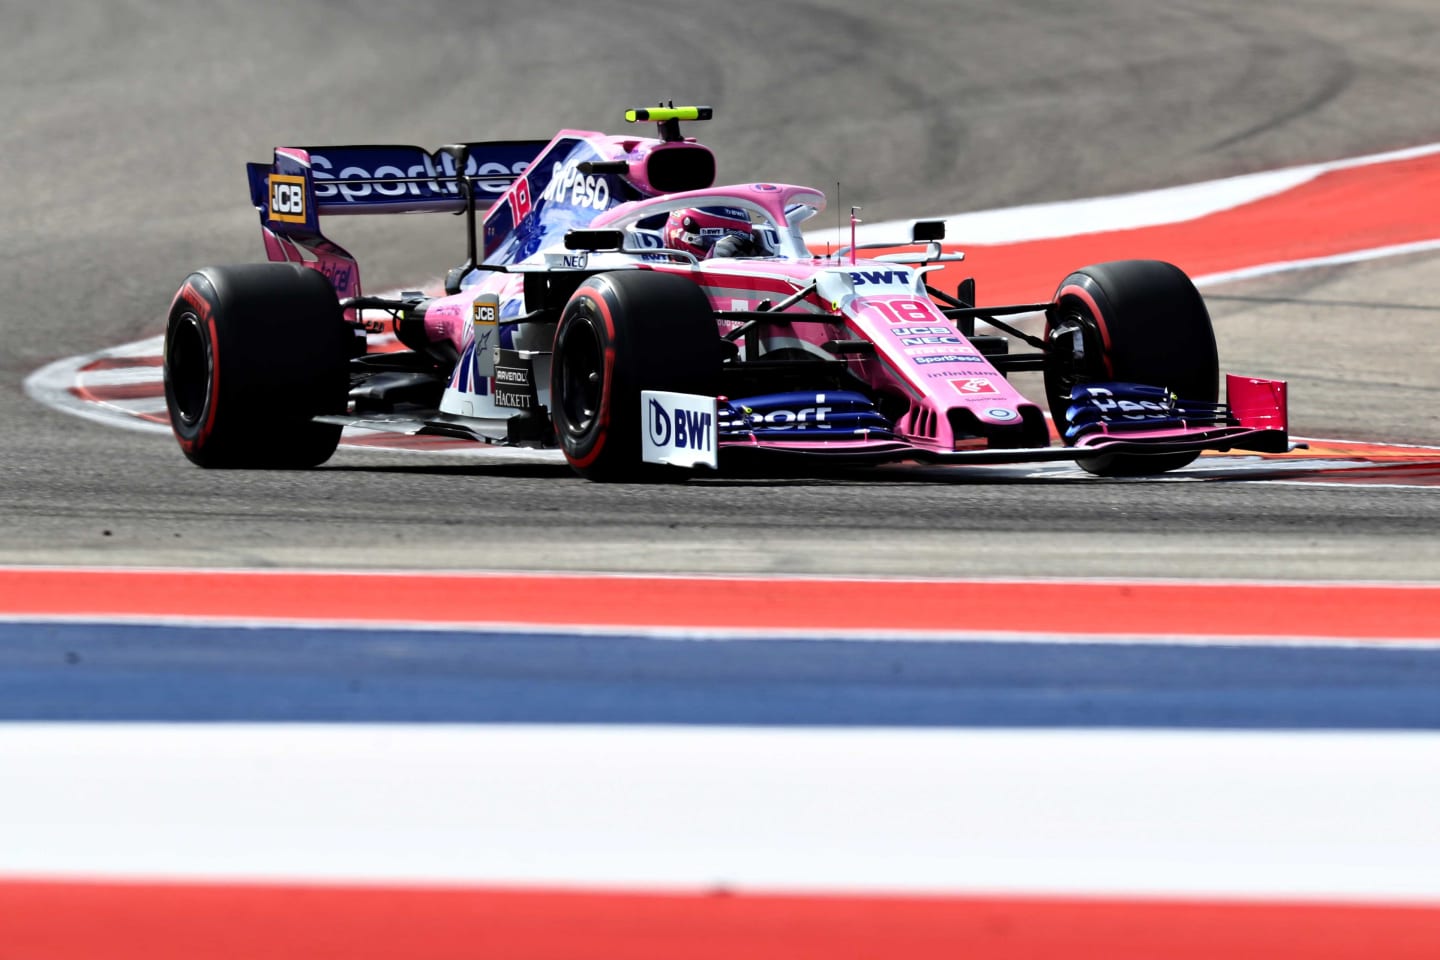 AUSTIN, TEXAS - NOVEMBER 02: Lance Stroll of Canada driving the (18) Racing Point RP19 Mercedes on track during final practice for the F1 Grand Prix of USA at Circuit of The Americas on November 02, 2019 in Austin, Texas. (Photo by Mark Thompson/Getty Images)